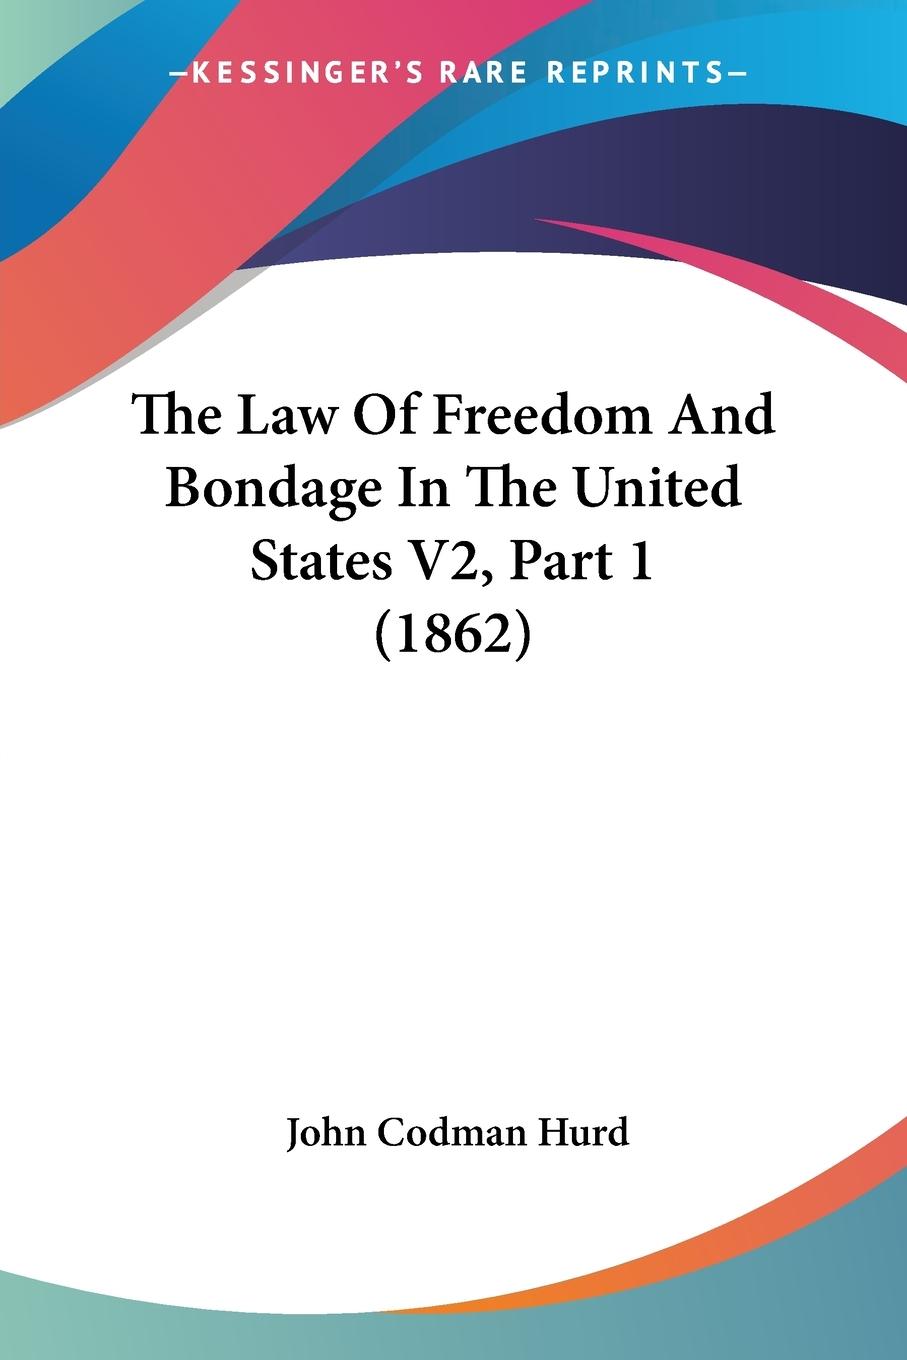 The Law Of Freedom And Bondage In The United States V2, Part 1 (1862) - Hurd, John Codman